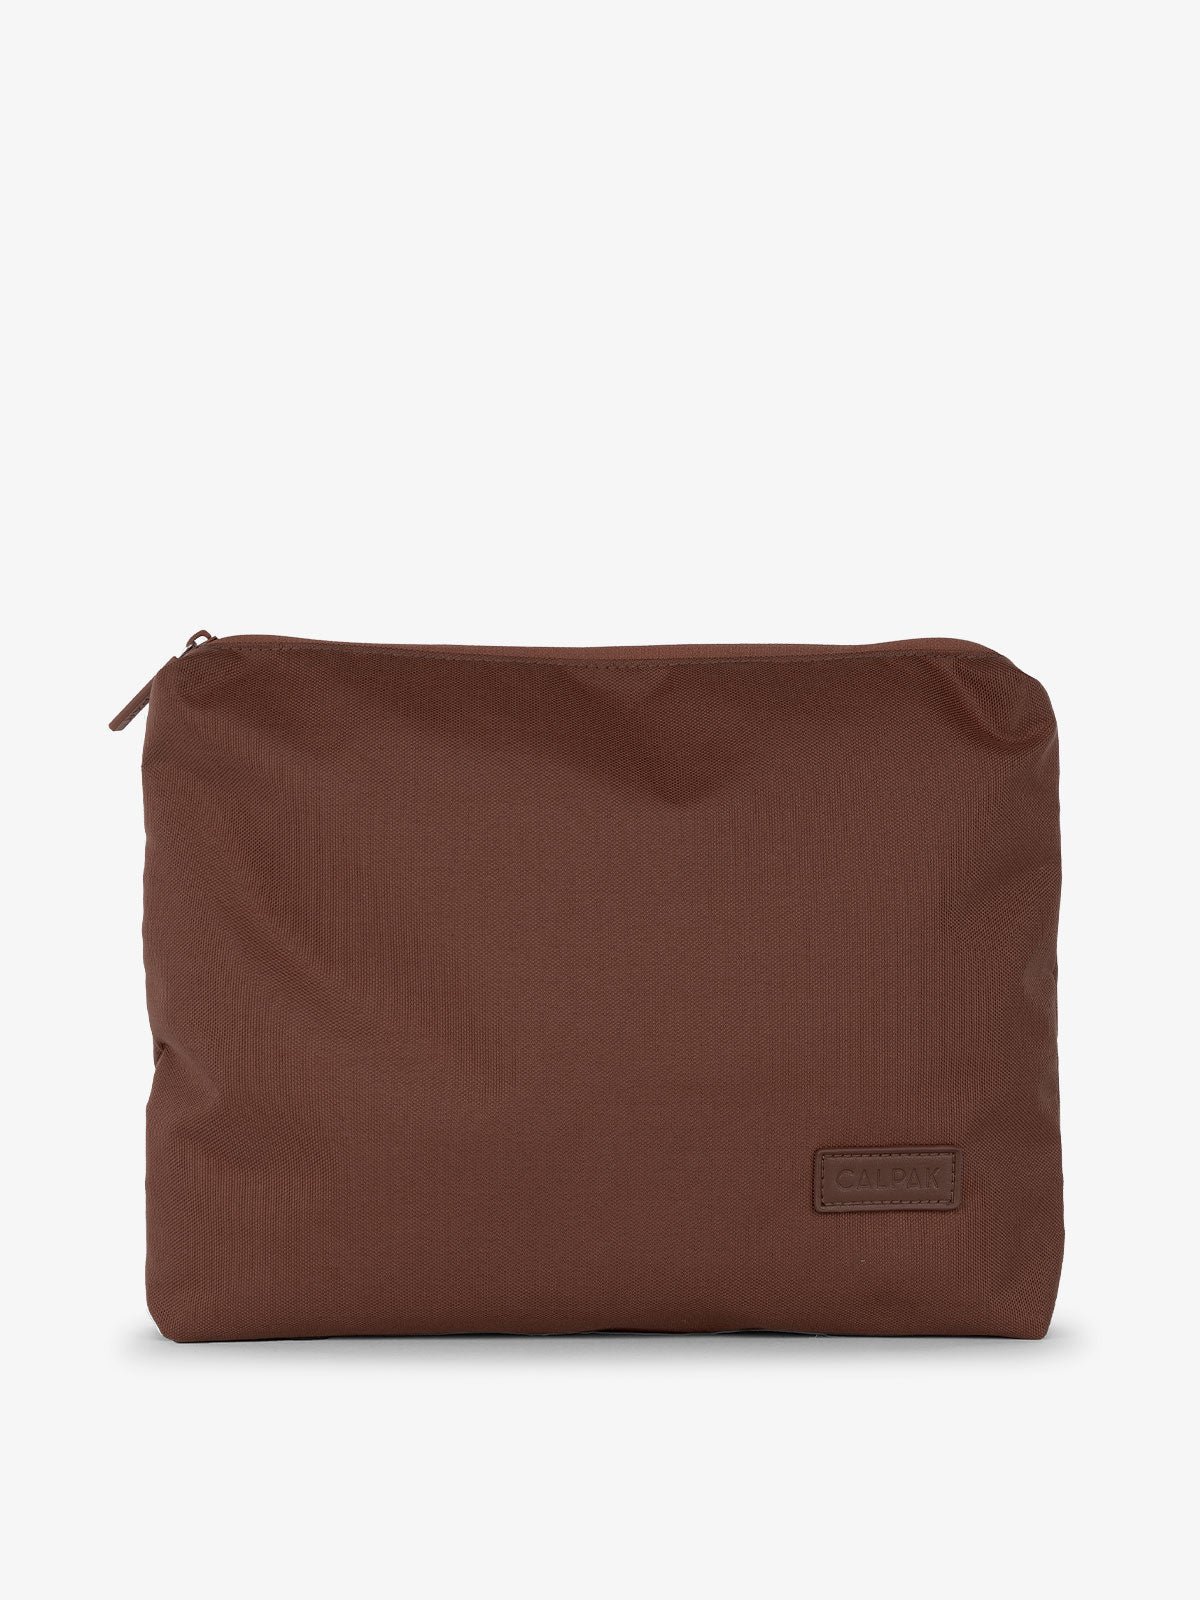 CALPAK water-resistant travel pouch for luggage in walnut brown